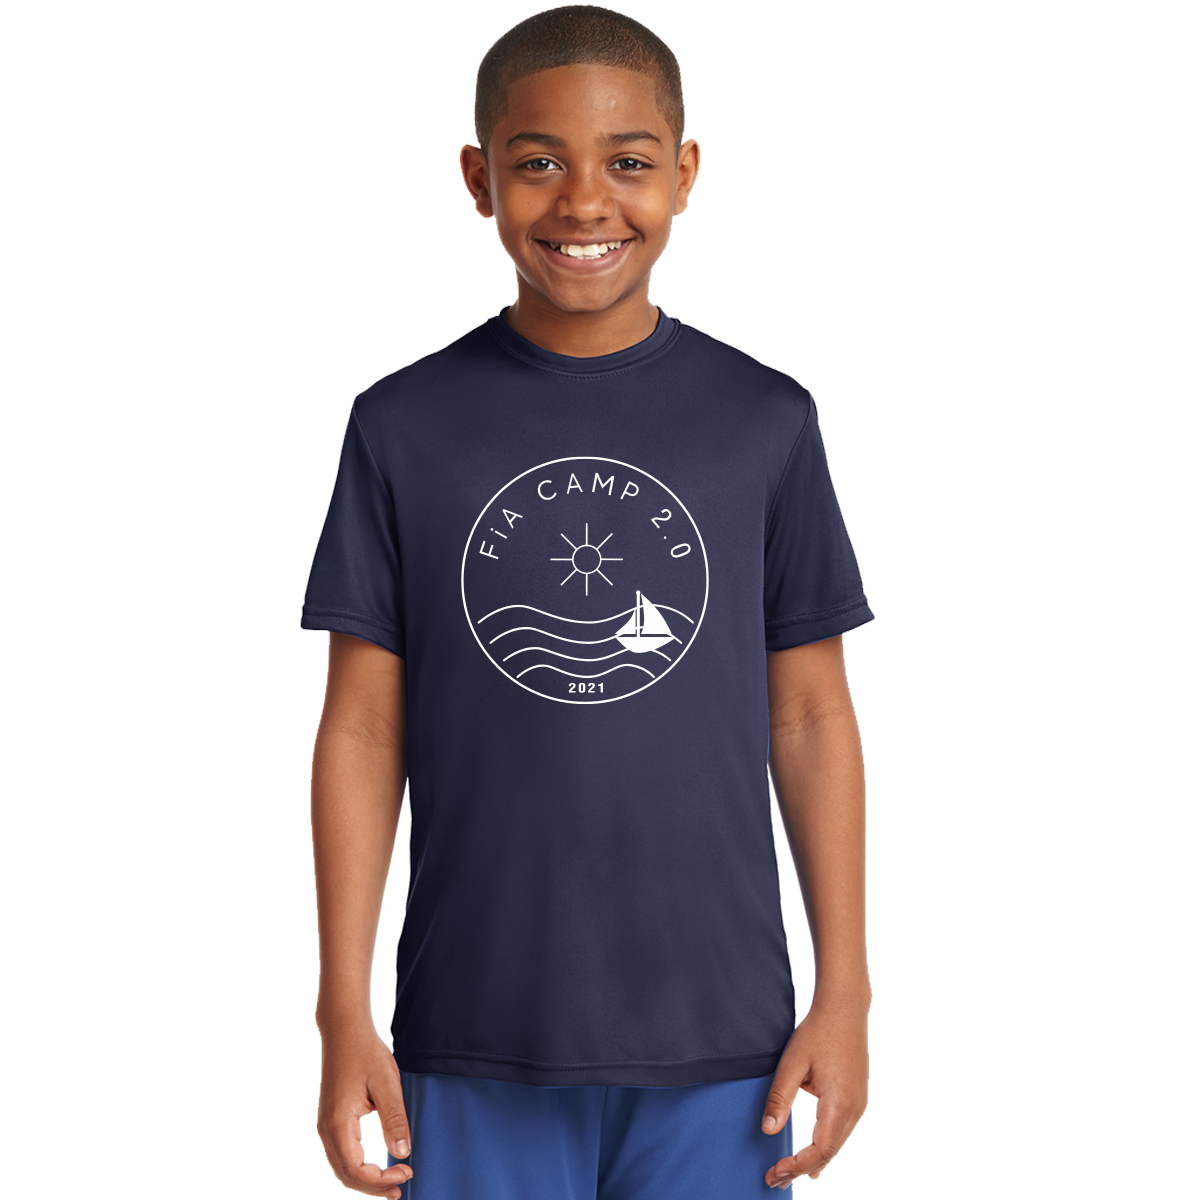 CLEARANCE ITEM - FiA Camp 2.0 - Sport-Tek Youth PosiCharge Competitor Tee (Navy)